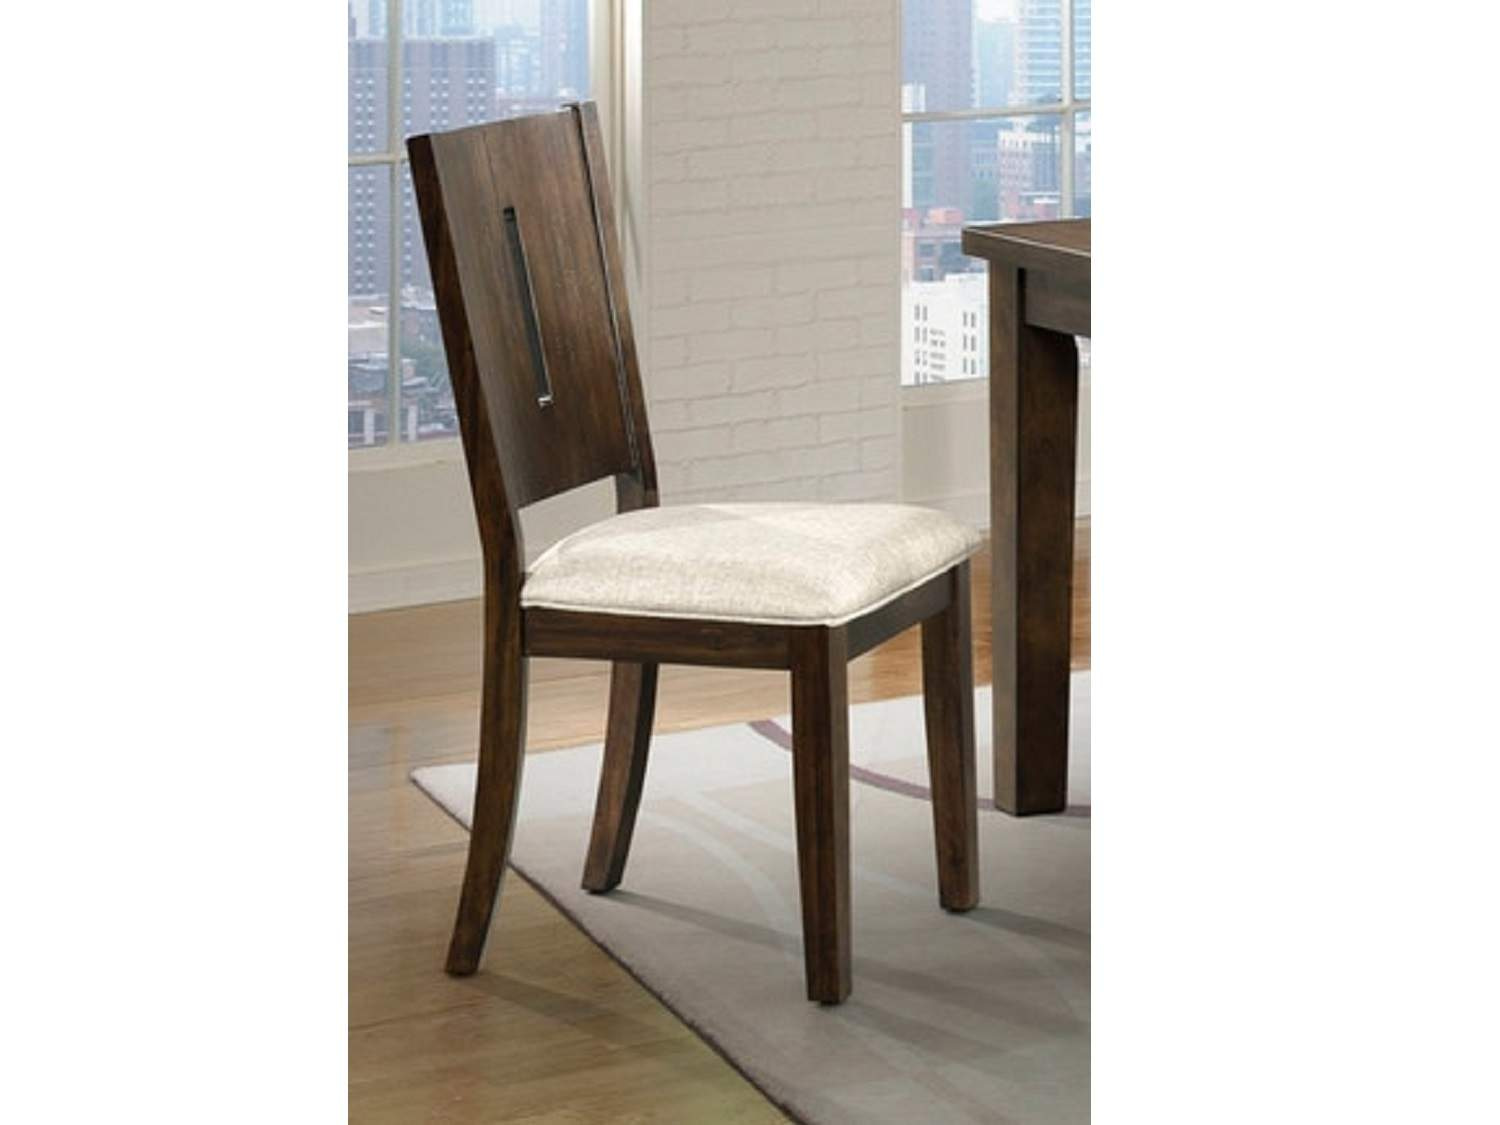 WESTDALE Keyhole Dining Chair